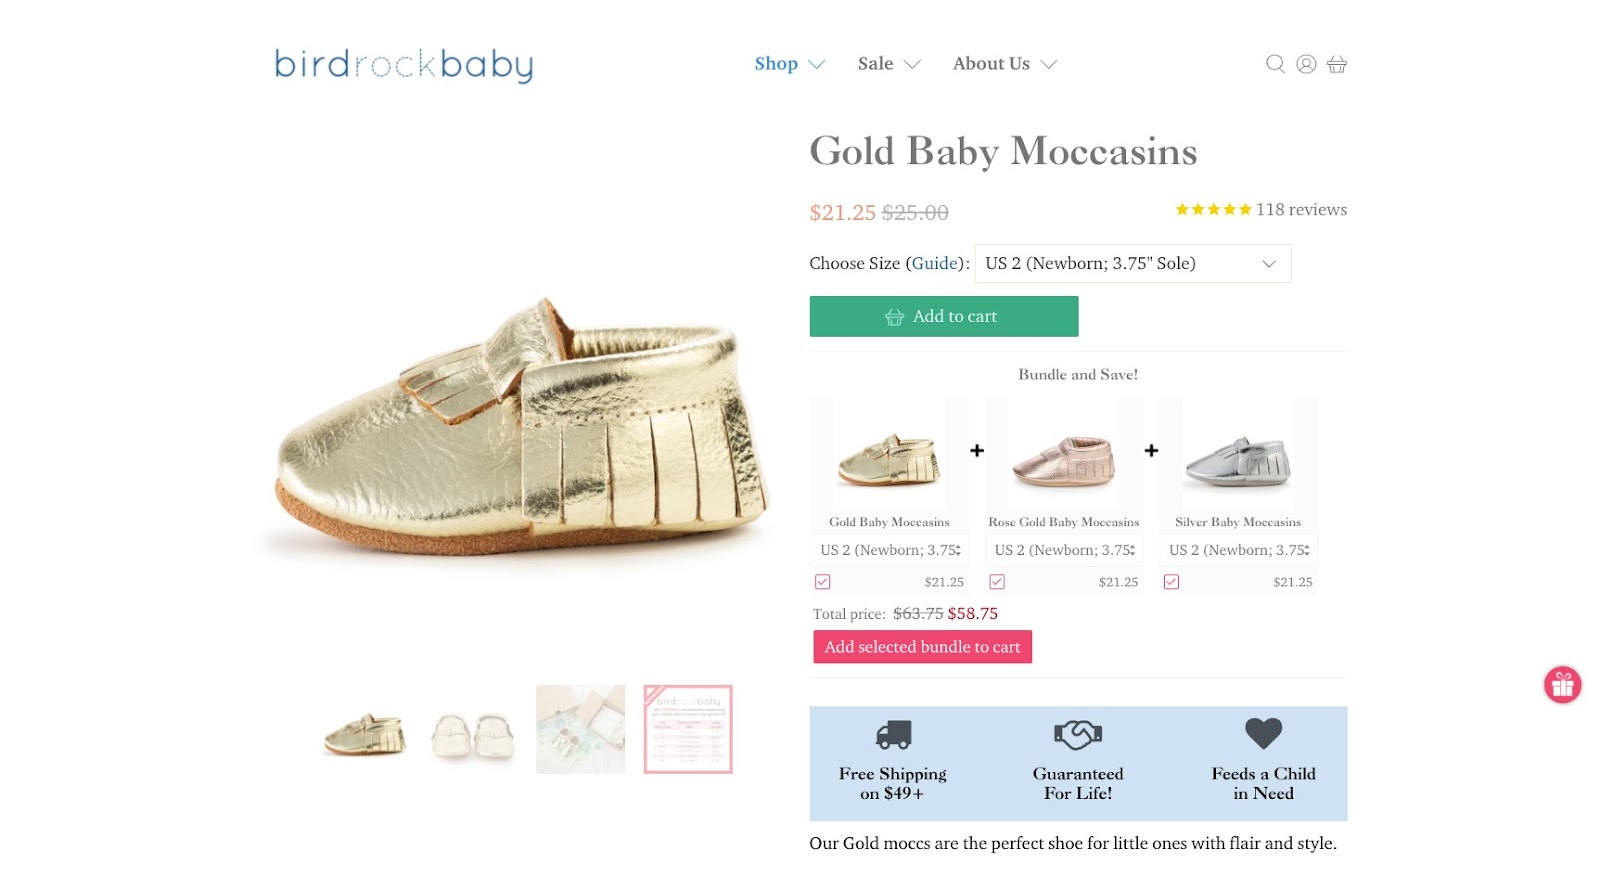 birdrock baby gold moccasins product page